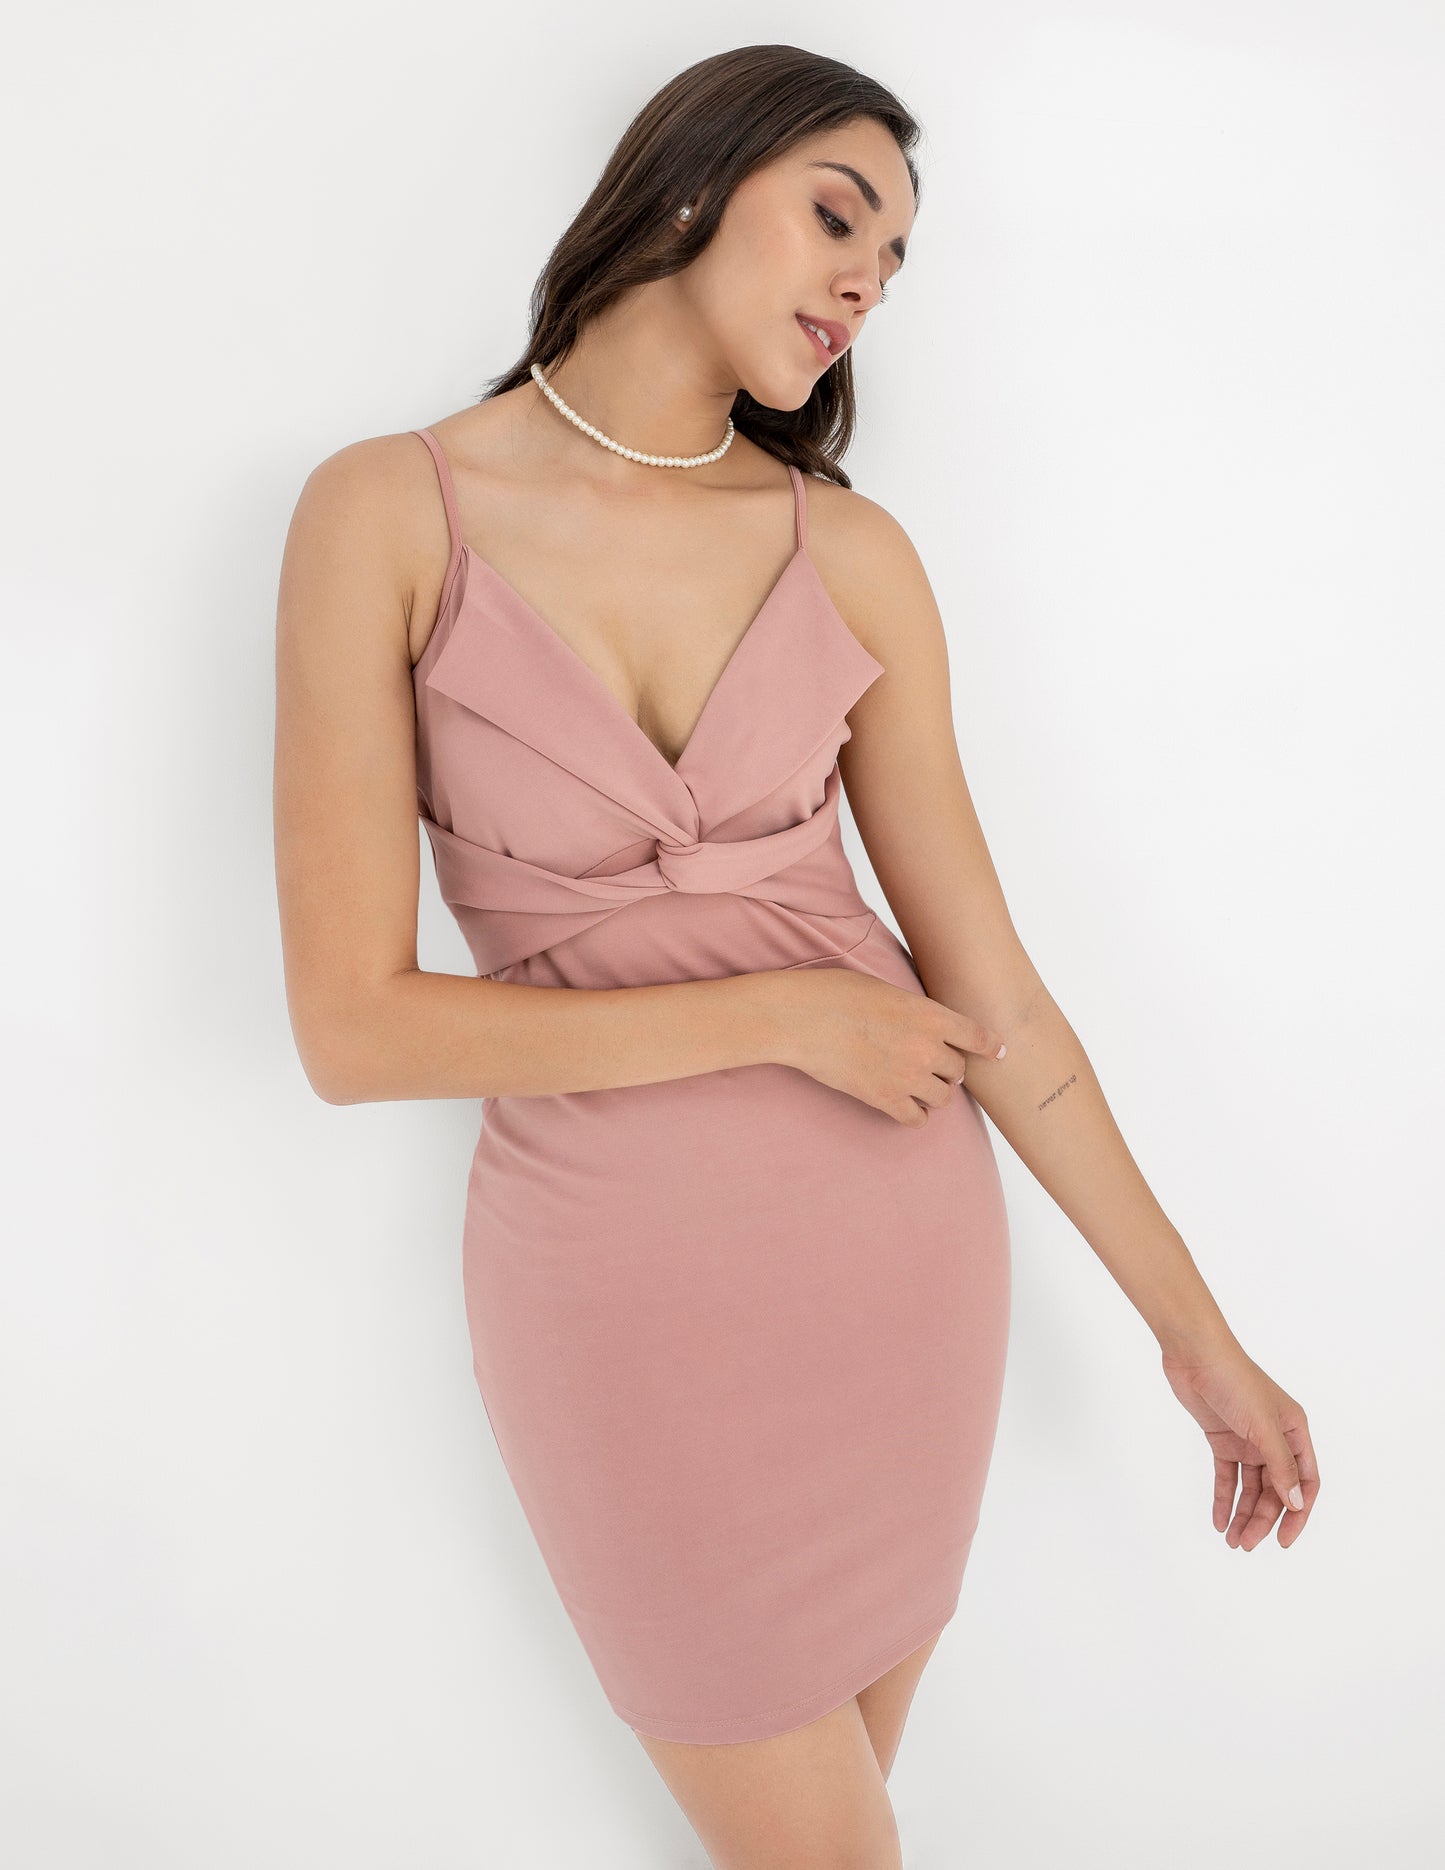 KNOTTED BODYCON DRESS